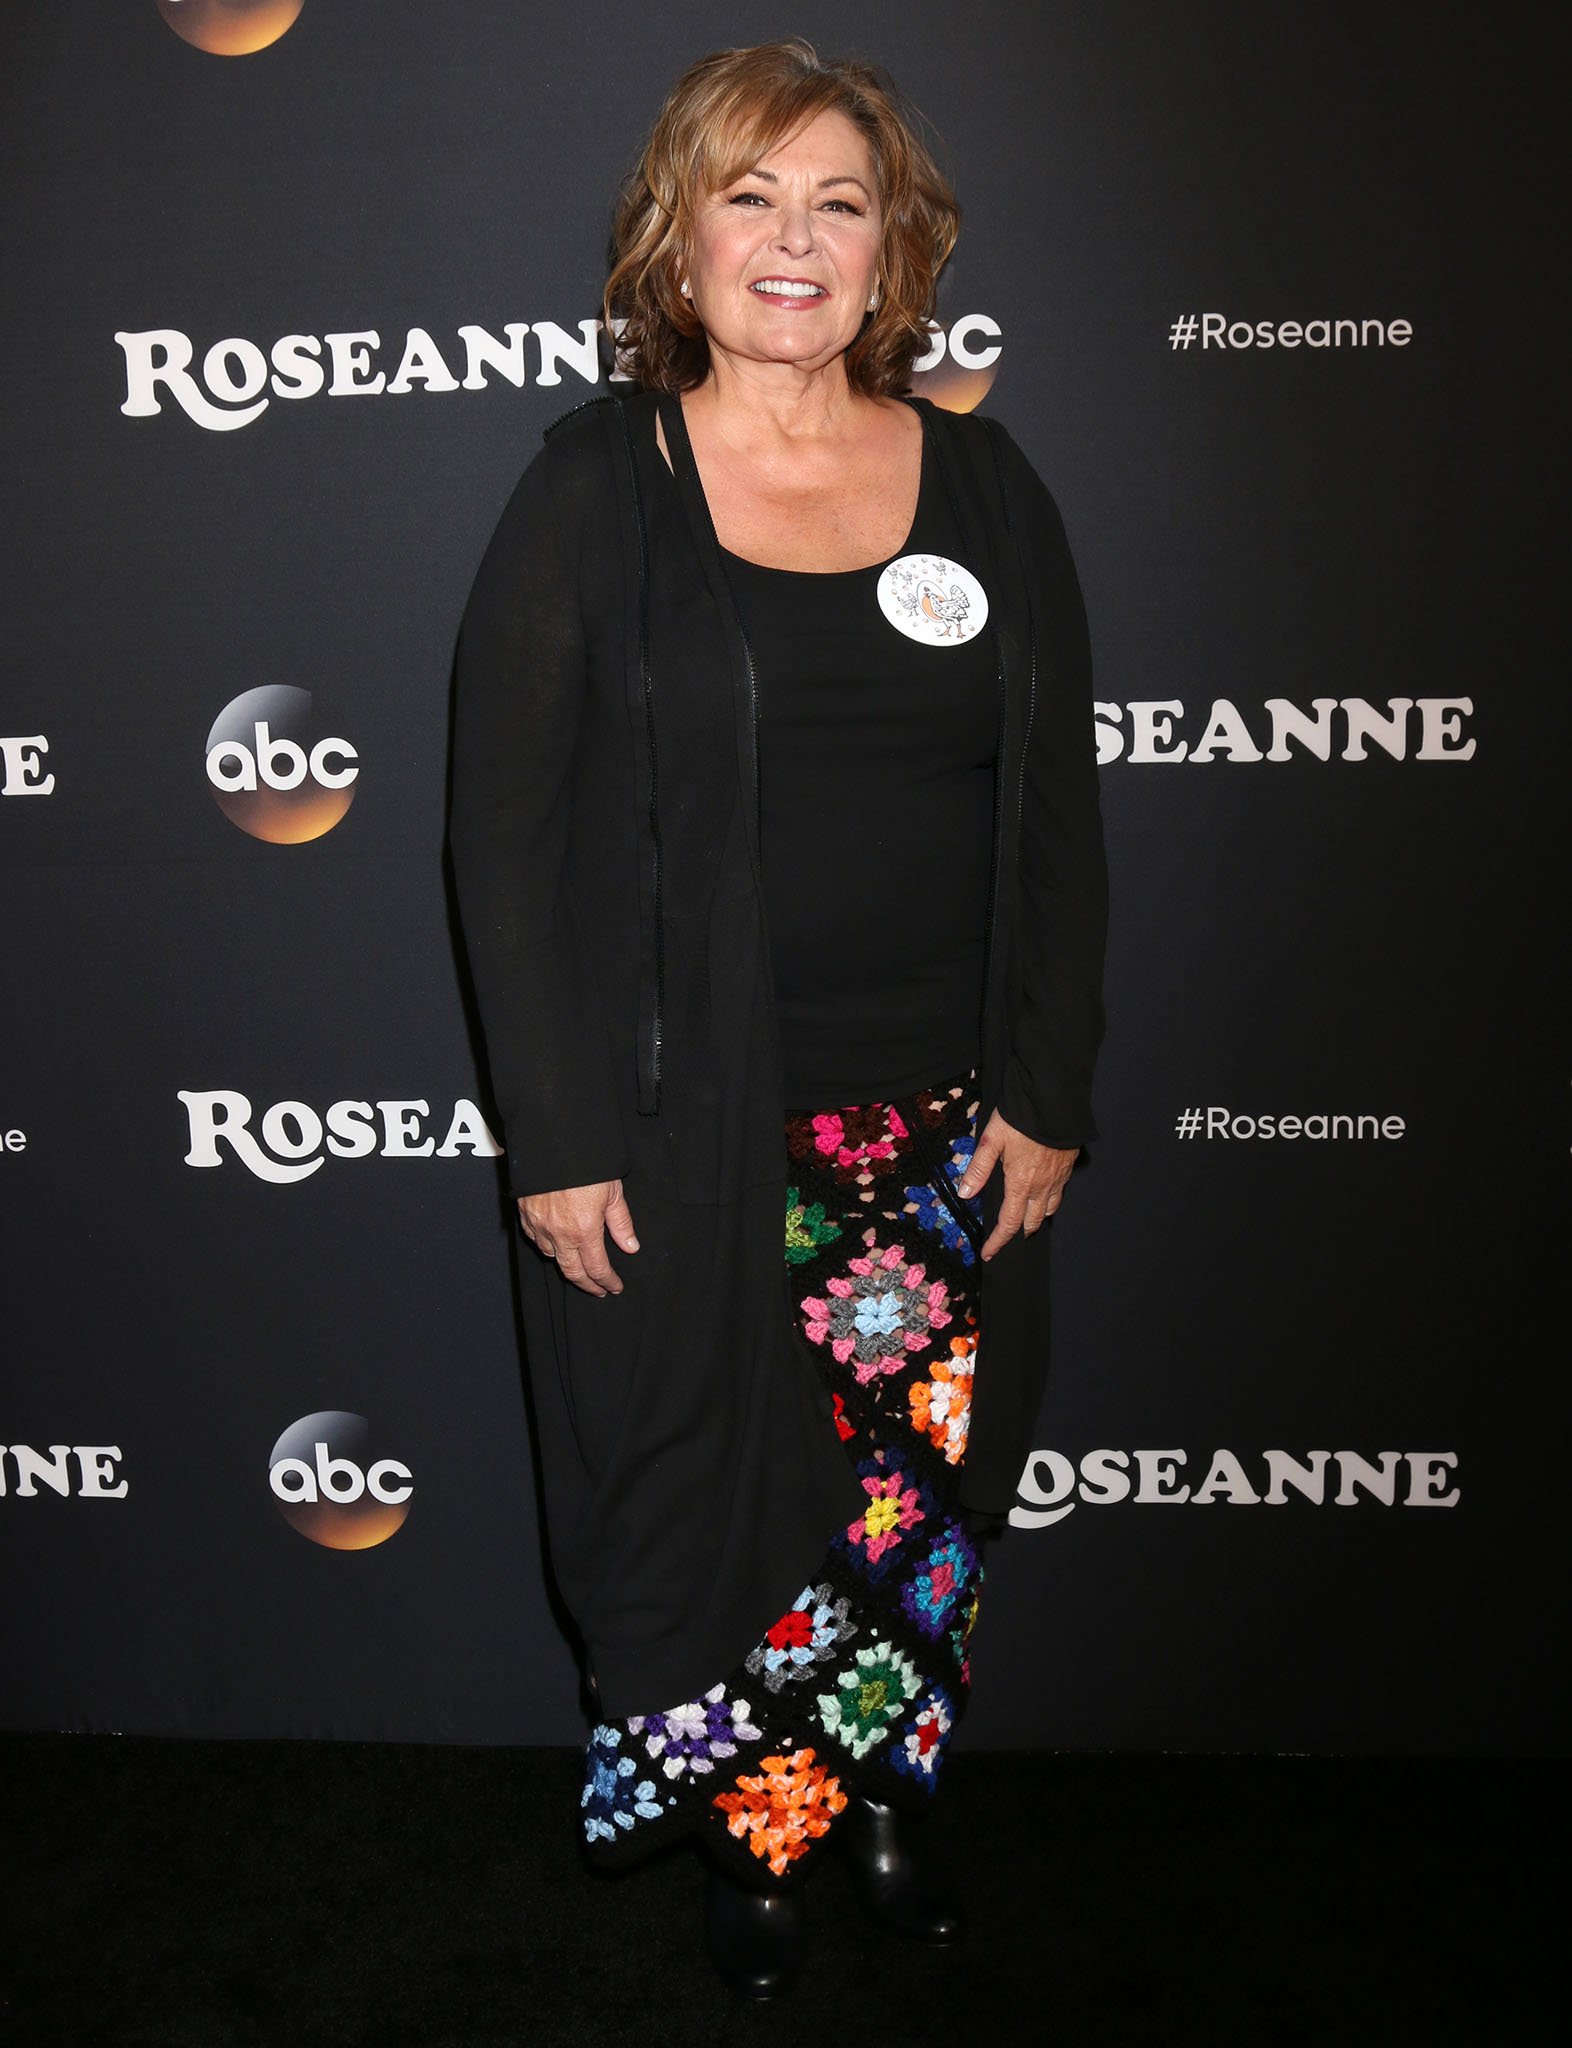 Roseanne Barr has won an Emmy and a Golden Globe Award for Best Actress for her work on her self-titled sitcom